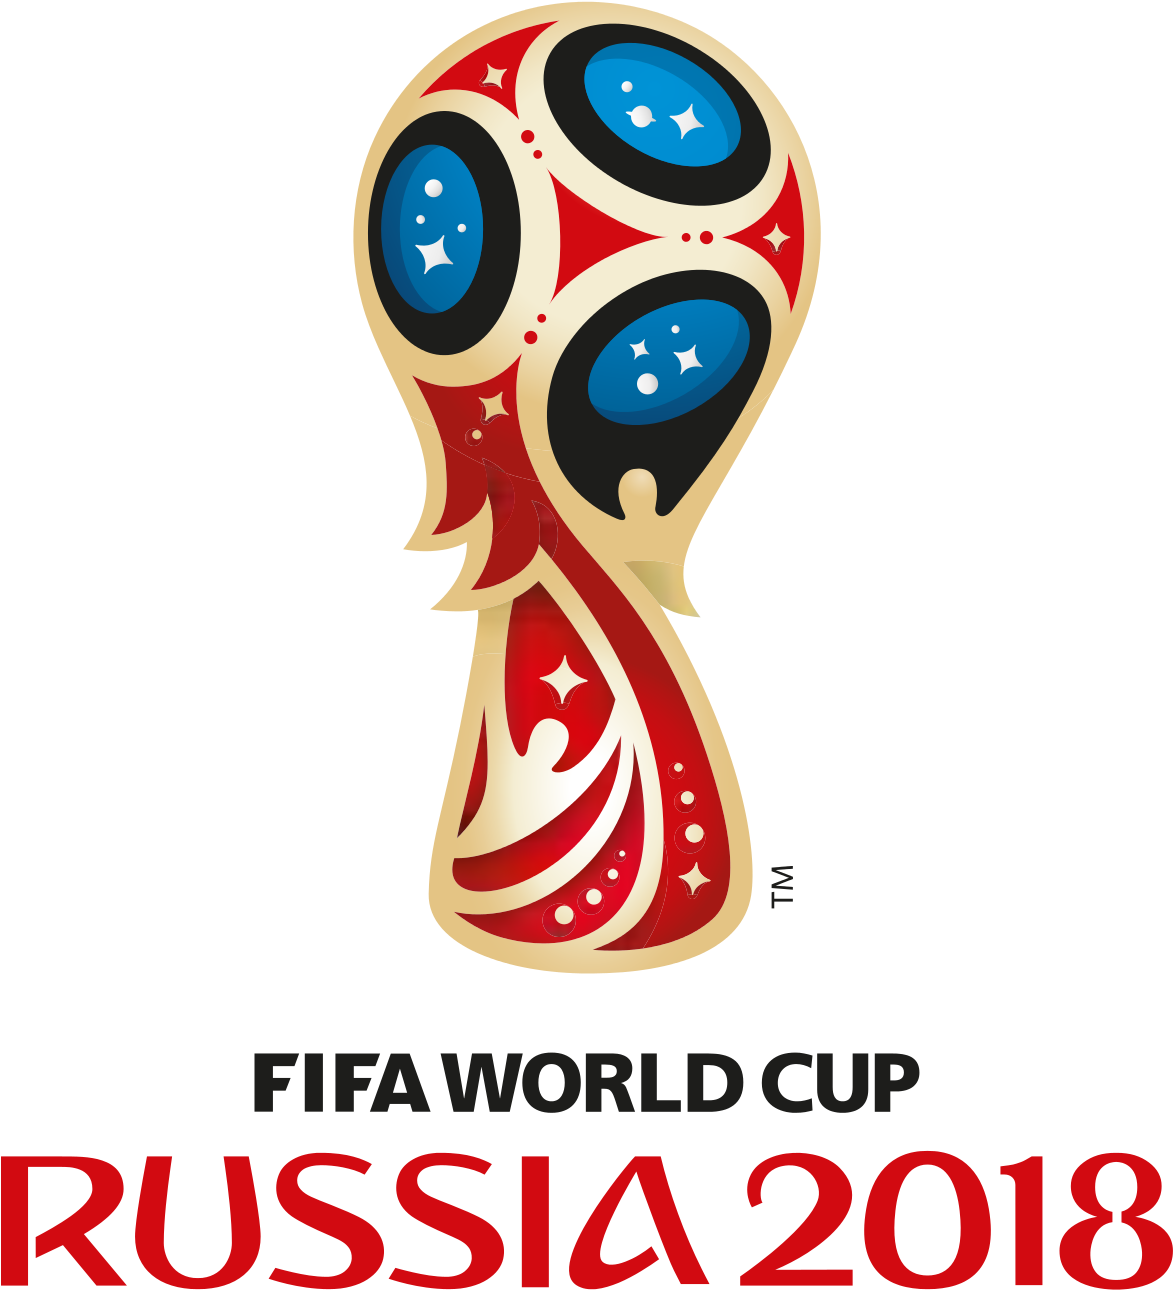 2018 Fifa World Cup Russia 2010 Fifa World Cup 2014 - Russia World Cup 2018 (2500x2749)